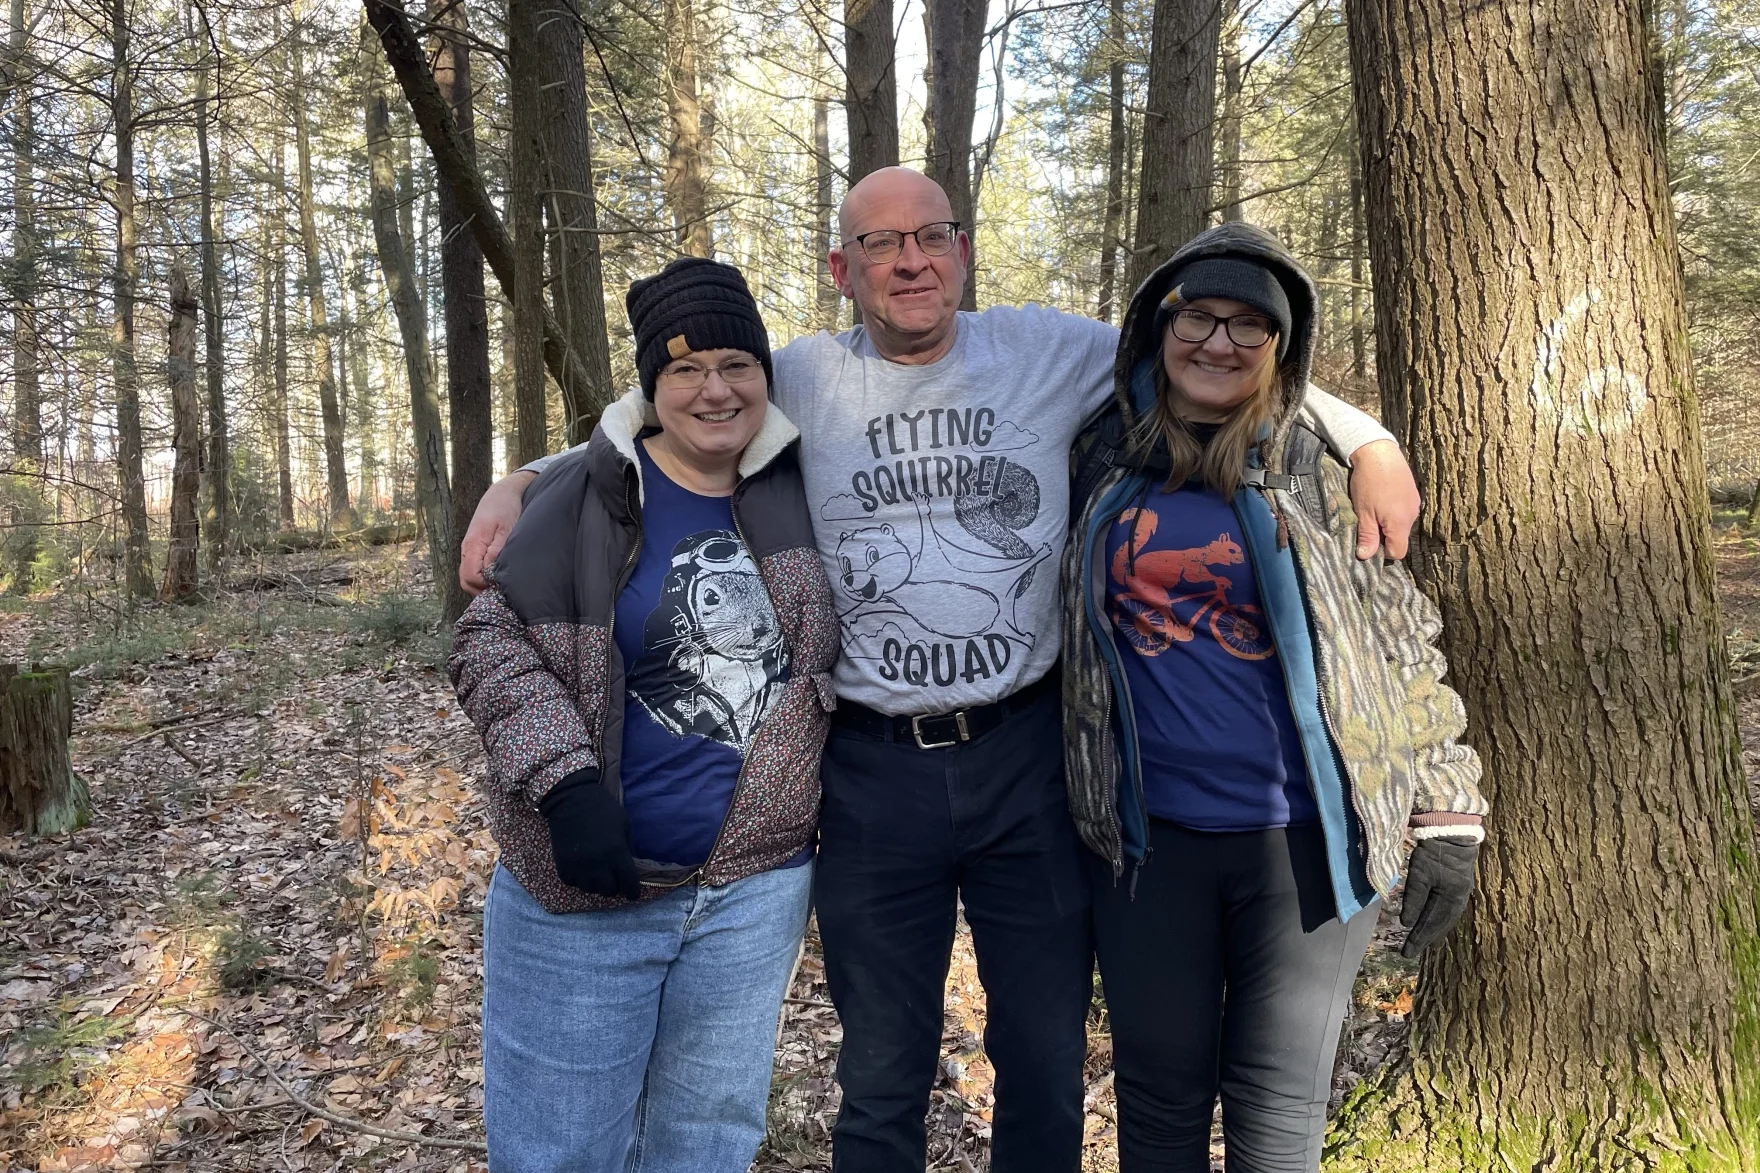 Three people stand arm-and-arm in a forest.